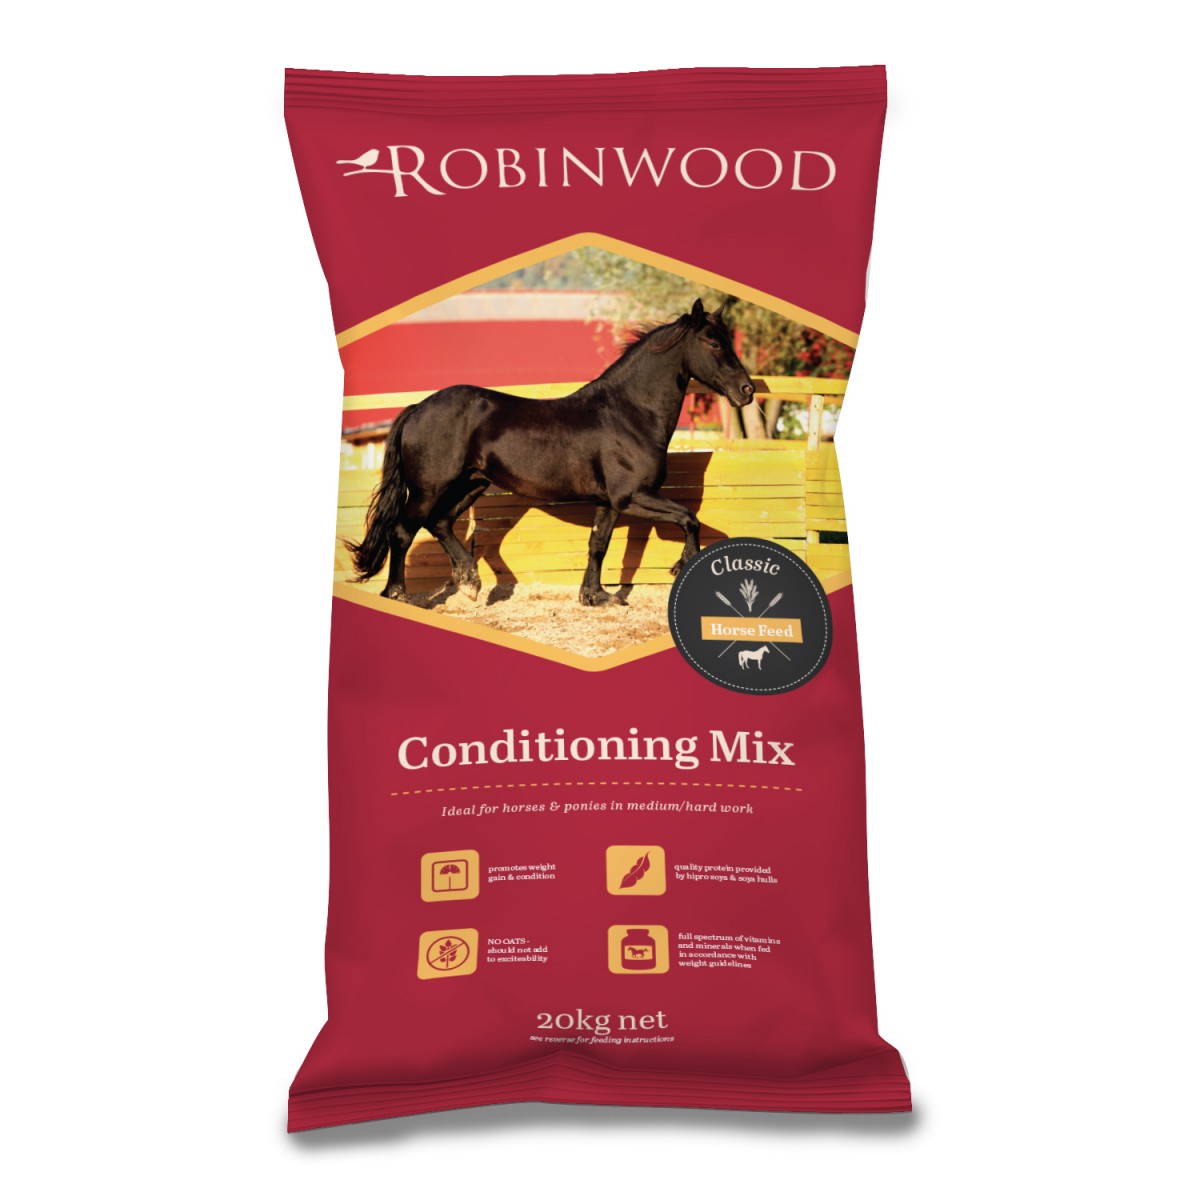 Conditioning Mix | Stephenson's Animal Feeds, Animal Feeds, Horse Feed, Feed, Layers Pellets